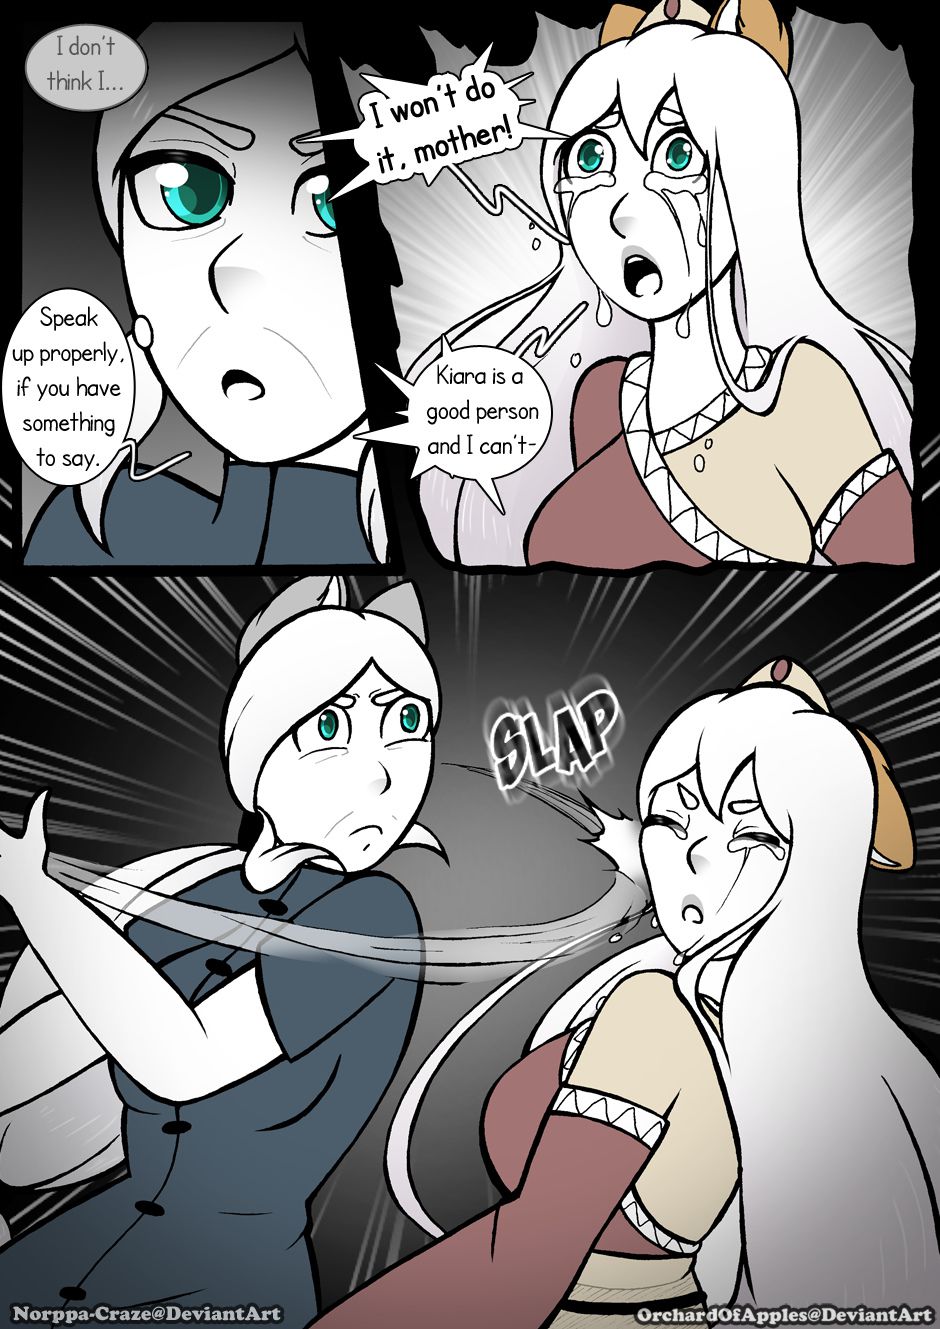 [Jeny-jen94] Between Kings and Queens [Ongoing] 275